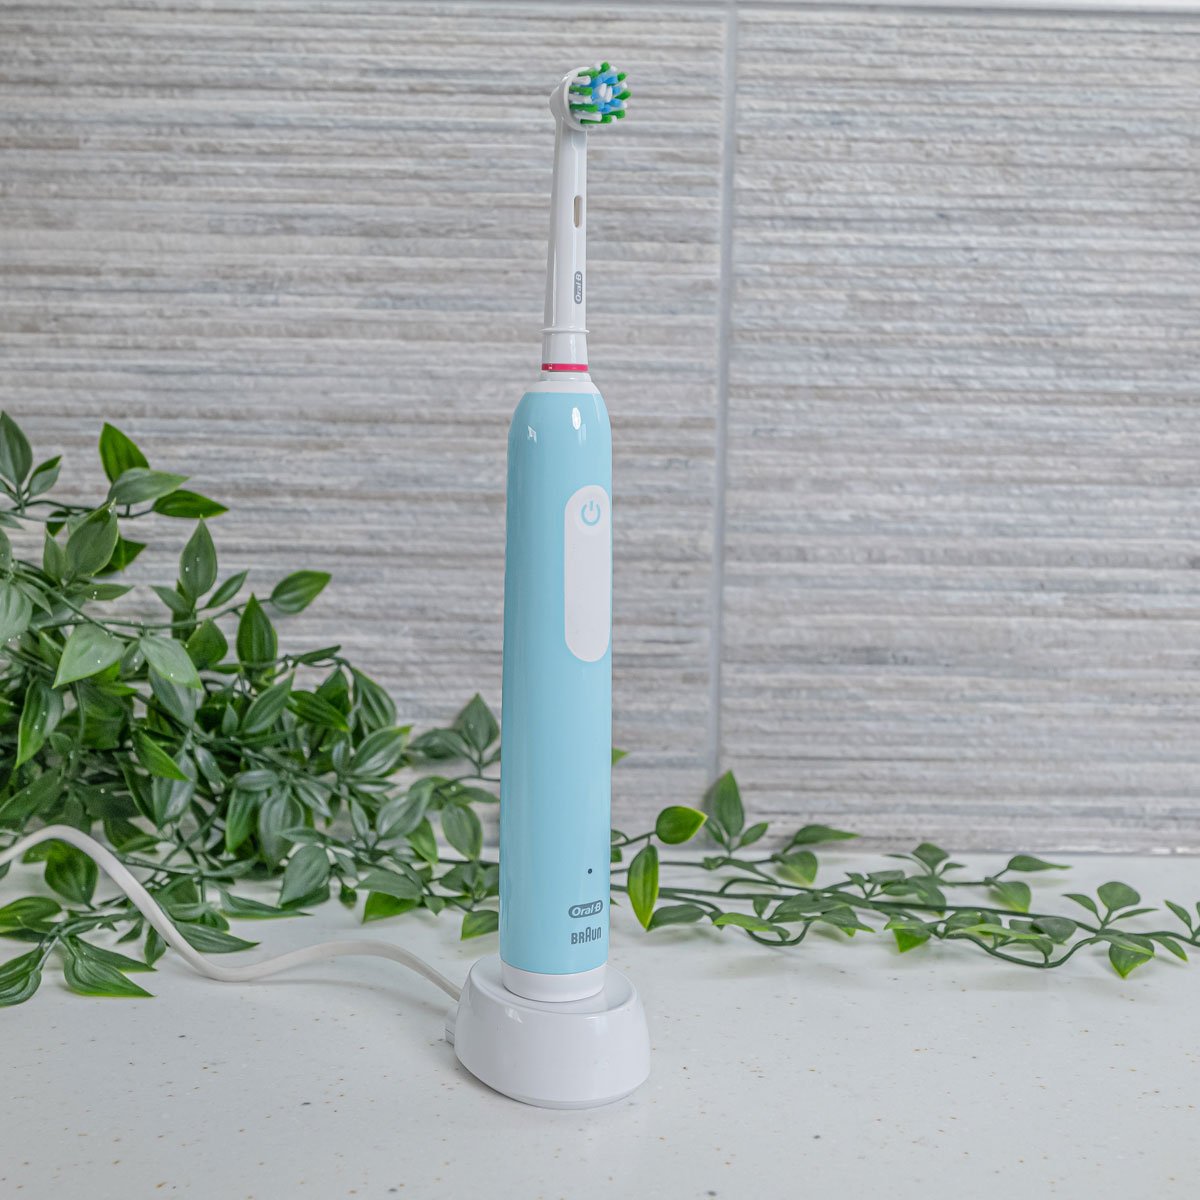 Pro 1 Series electric toothbrush by Oral-B on a charging stand